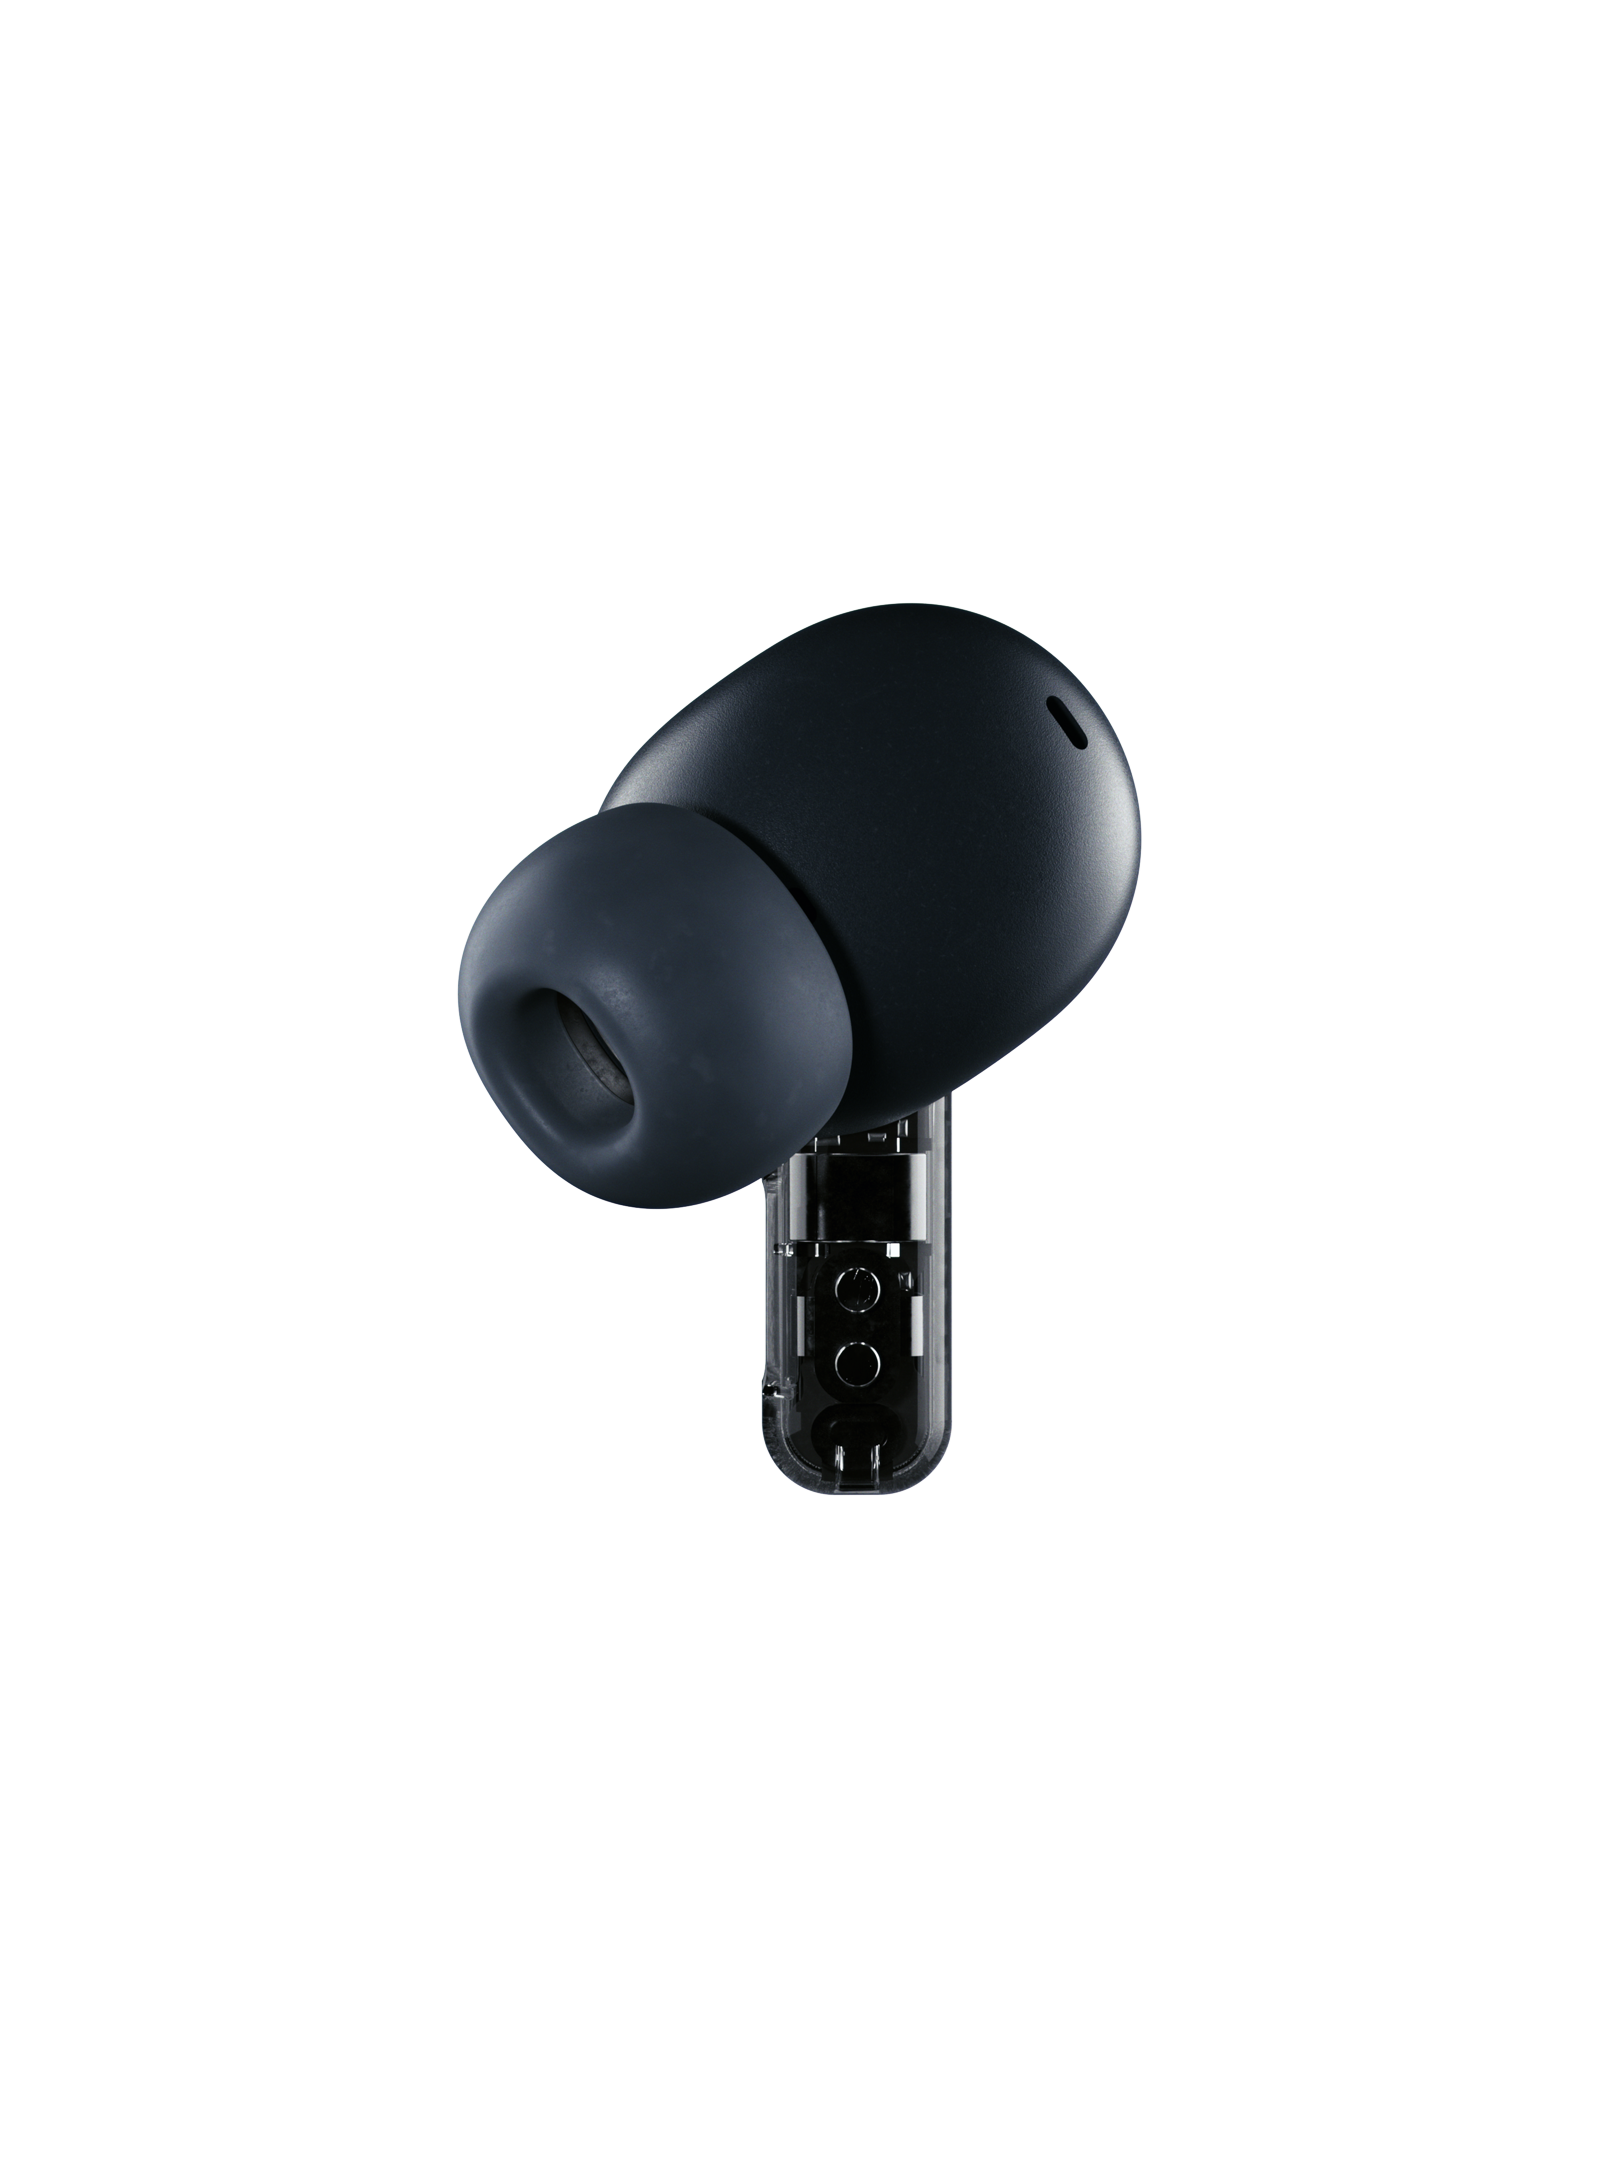 Nothing Ear 2 Buds Have Great Sound and Noise Canceling for $149 - CNET